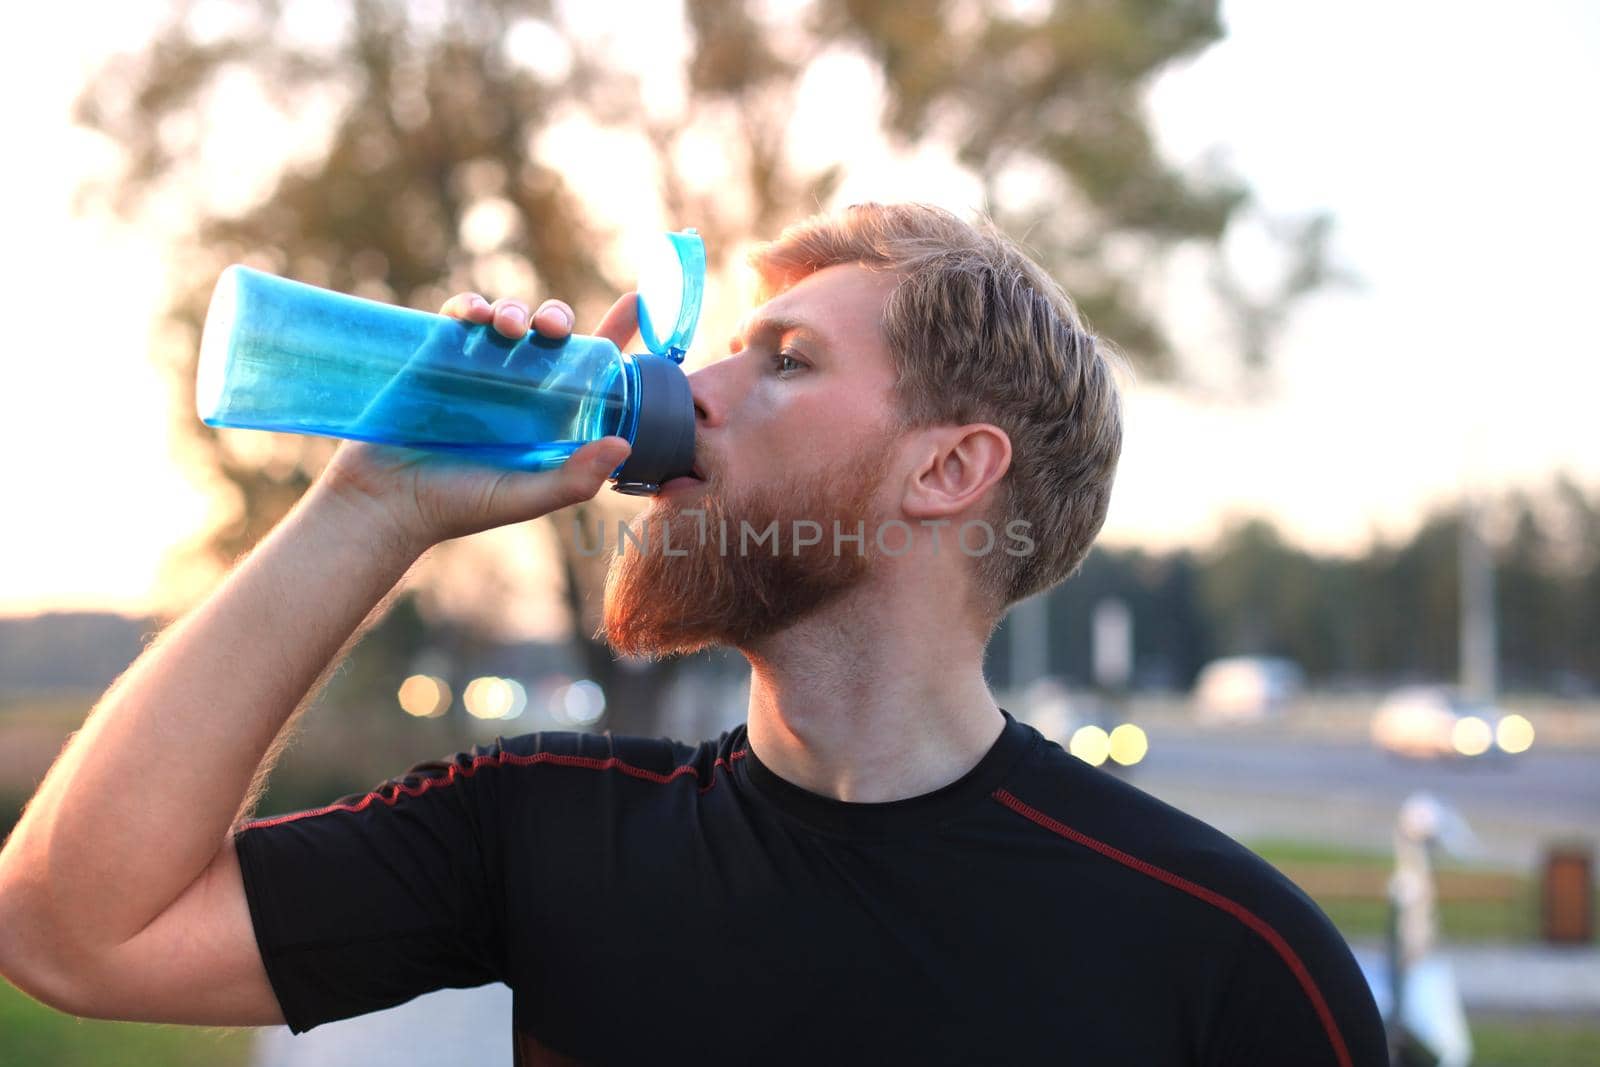 Handsome adult man drinking water from fitness bottle while standing outside, at sunset or sunrise. Runner